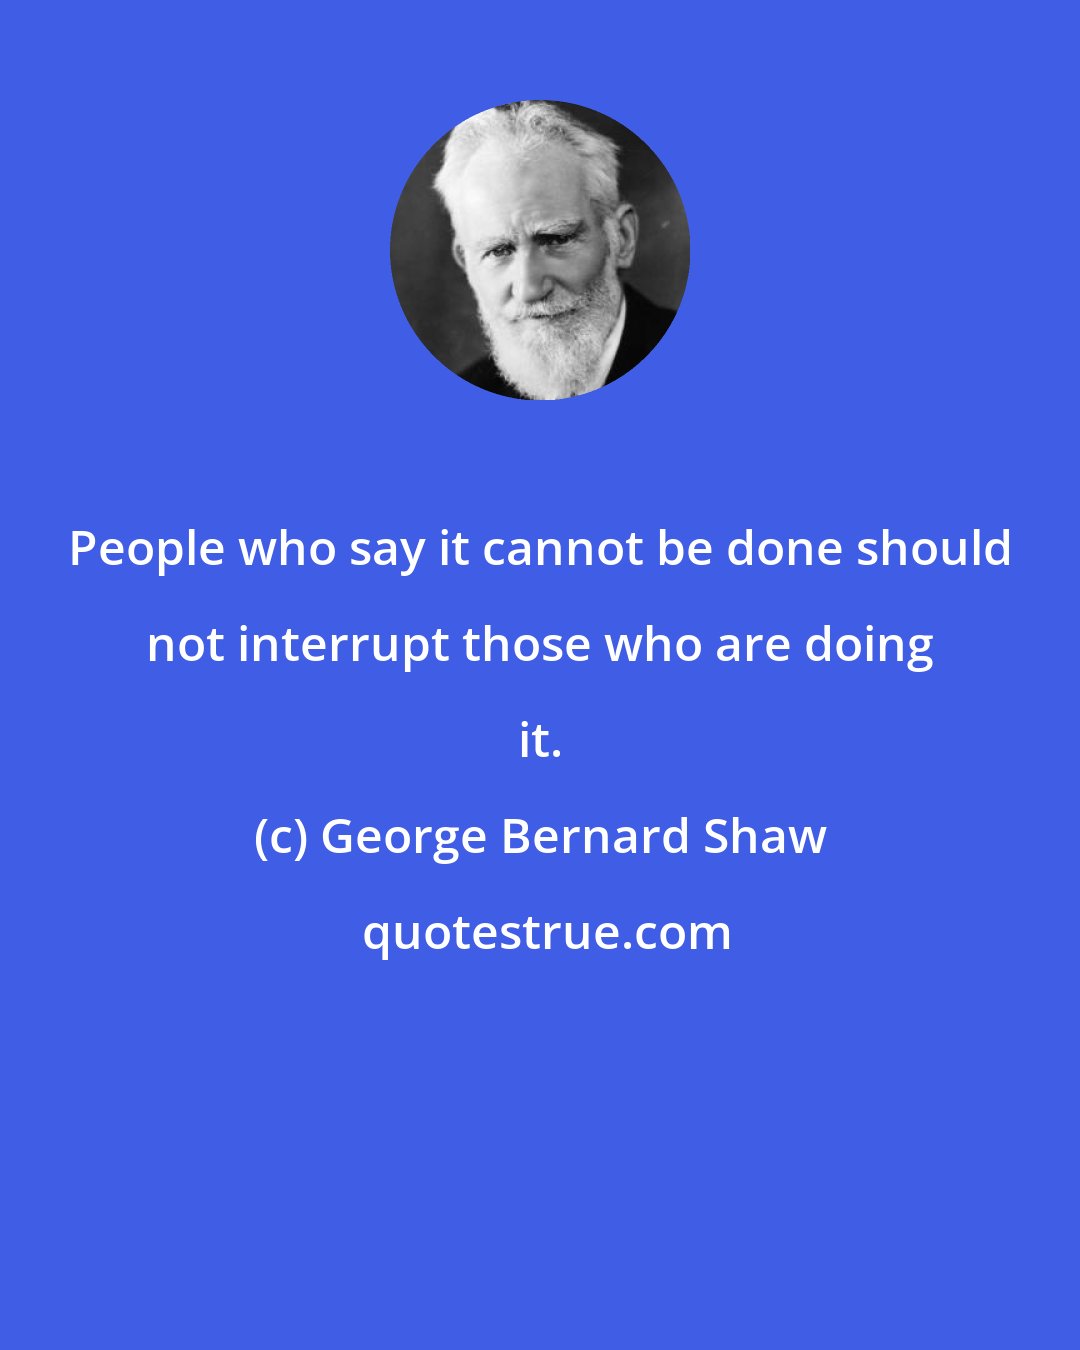 George Bernard Shaw: People who say it cannot be done should not interrupt those who are doing it.